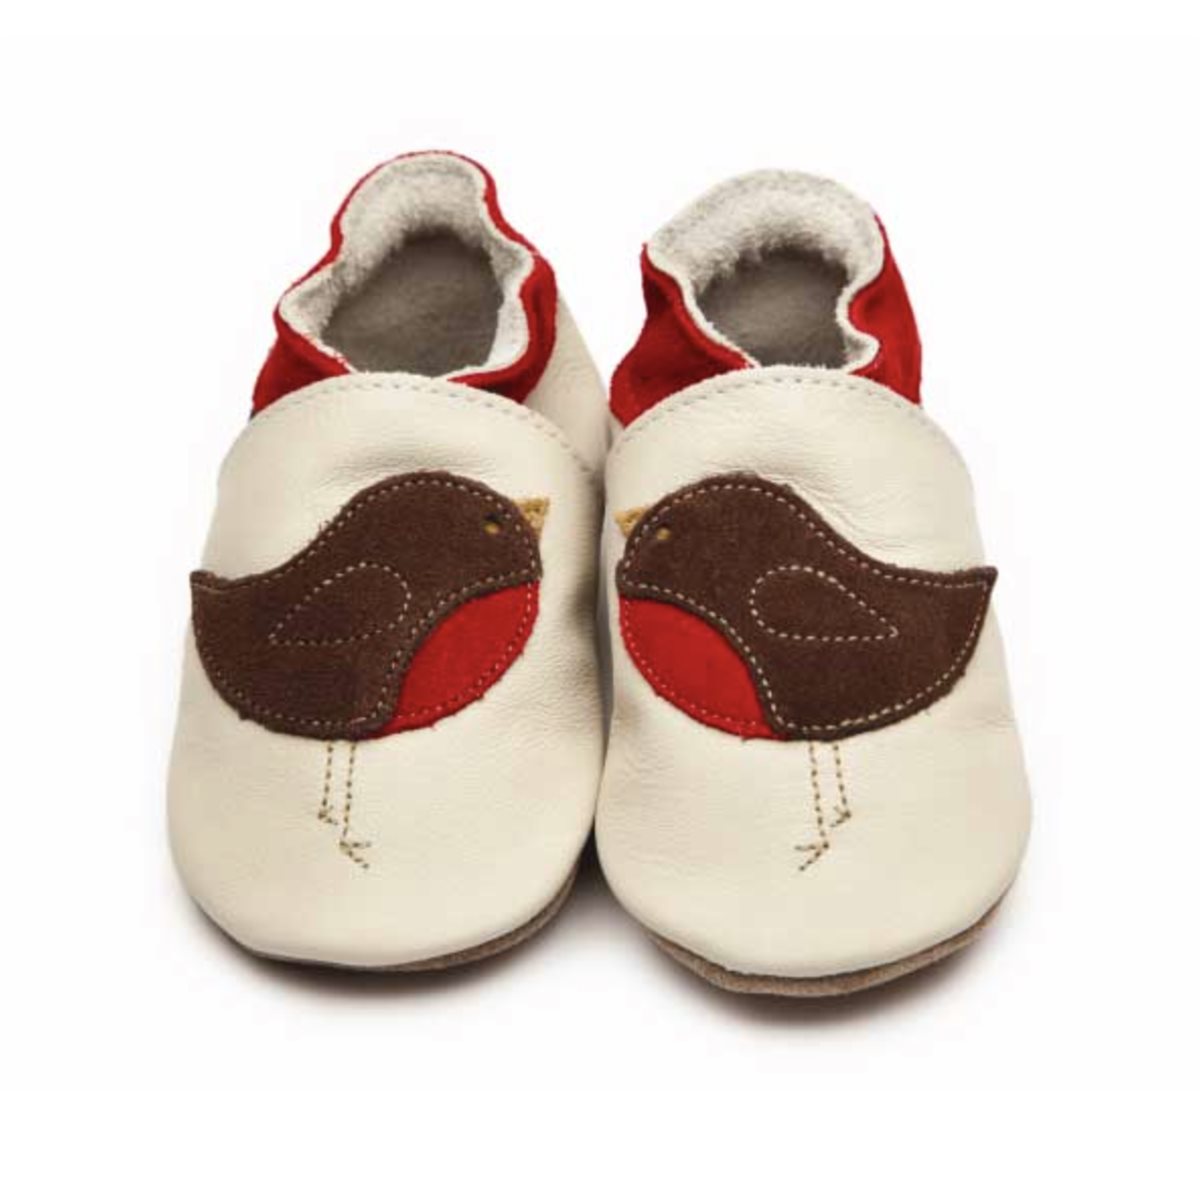 inch blue baby shoes